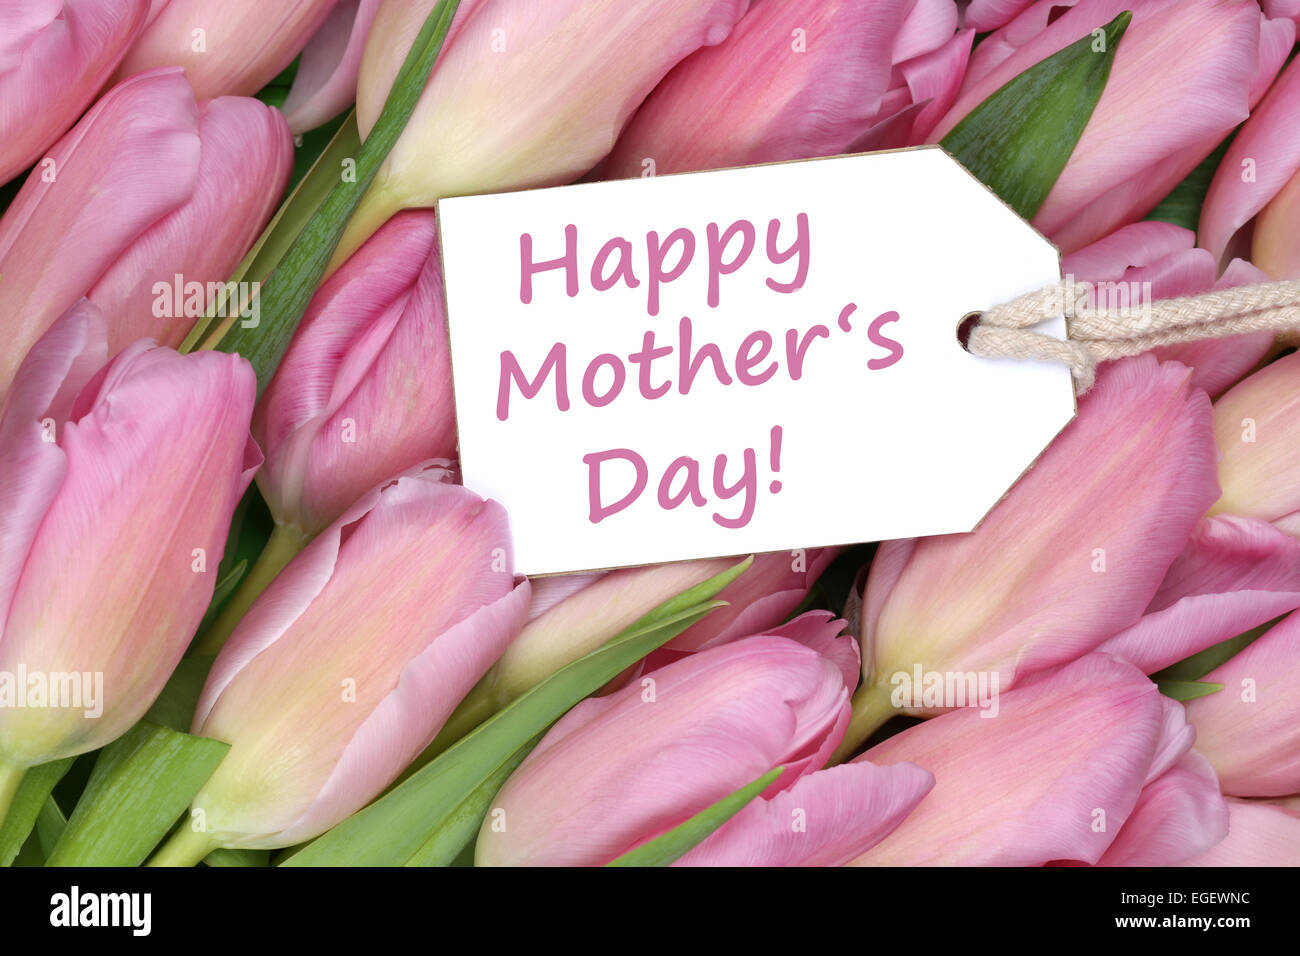 Happy mother's day on a tag with tulips flowers Stock Photo